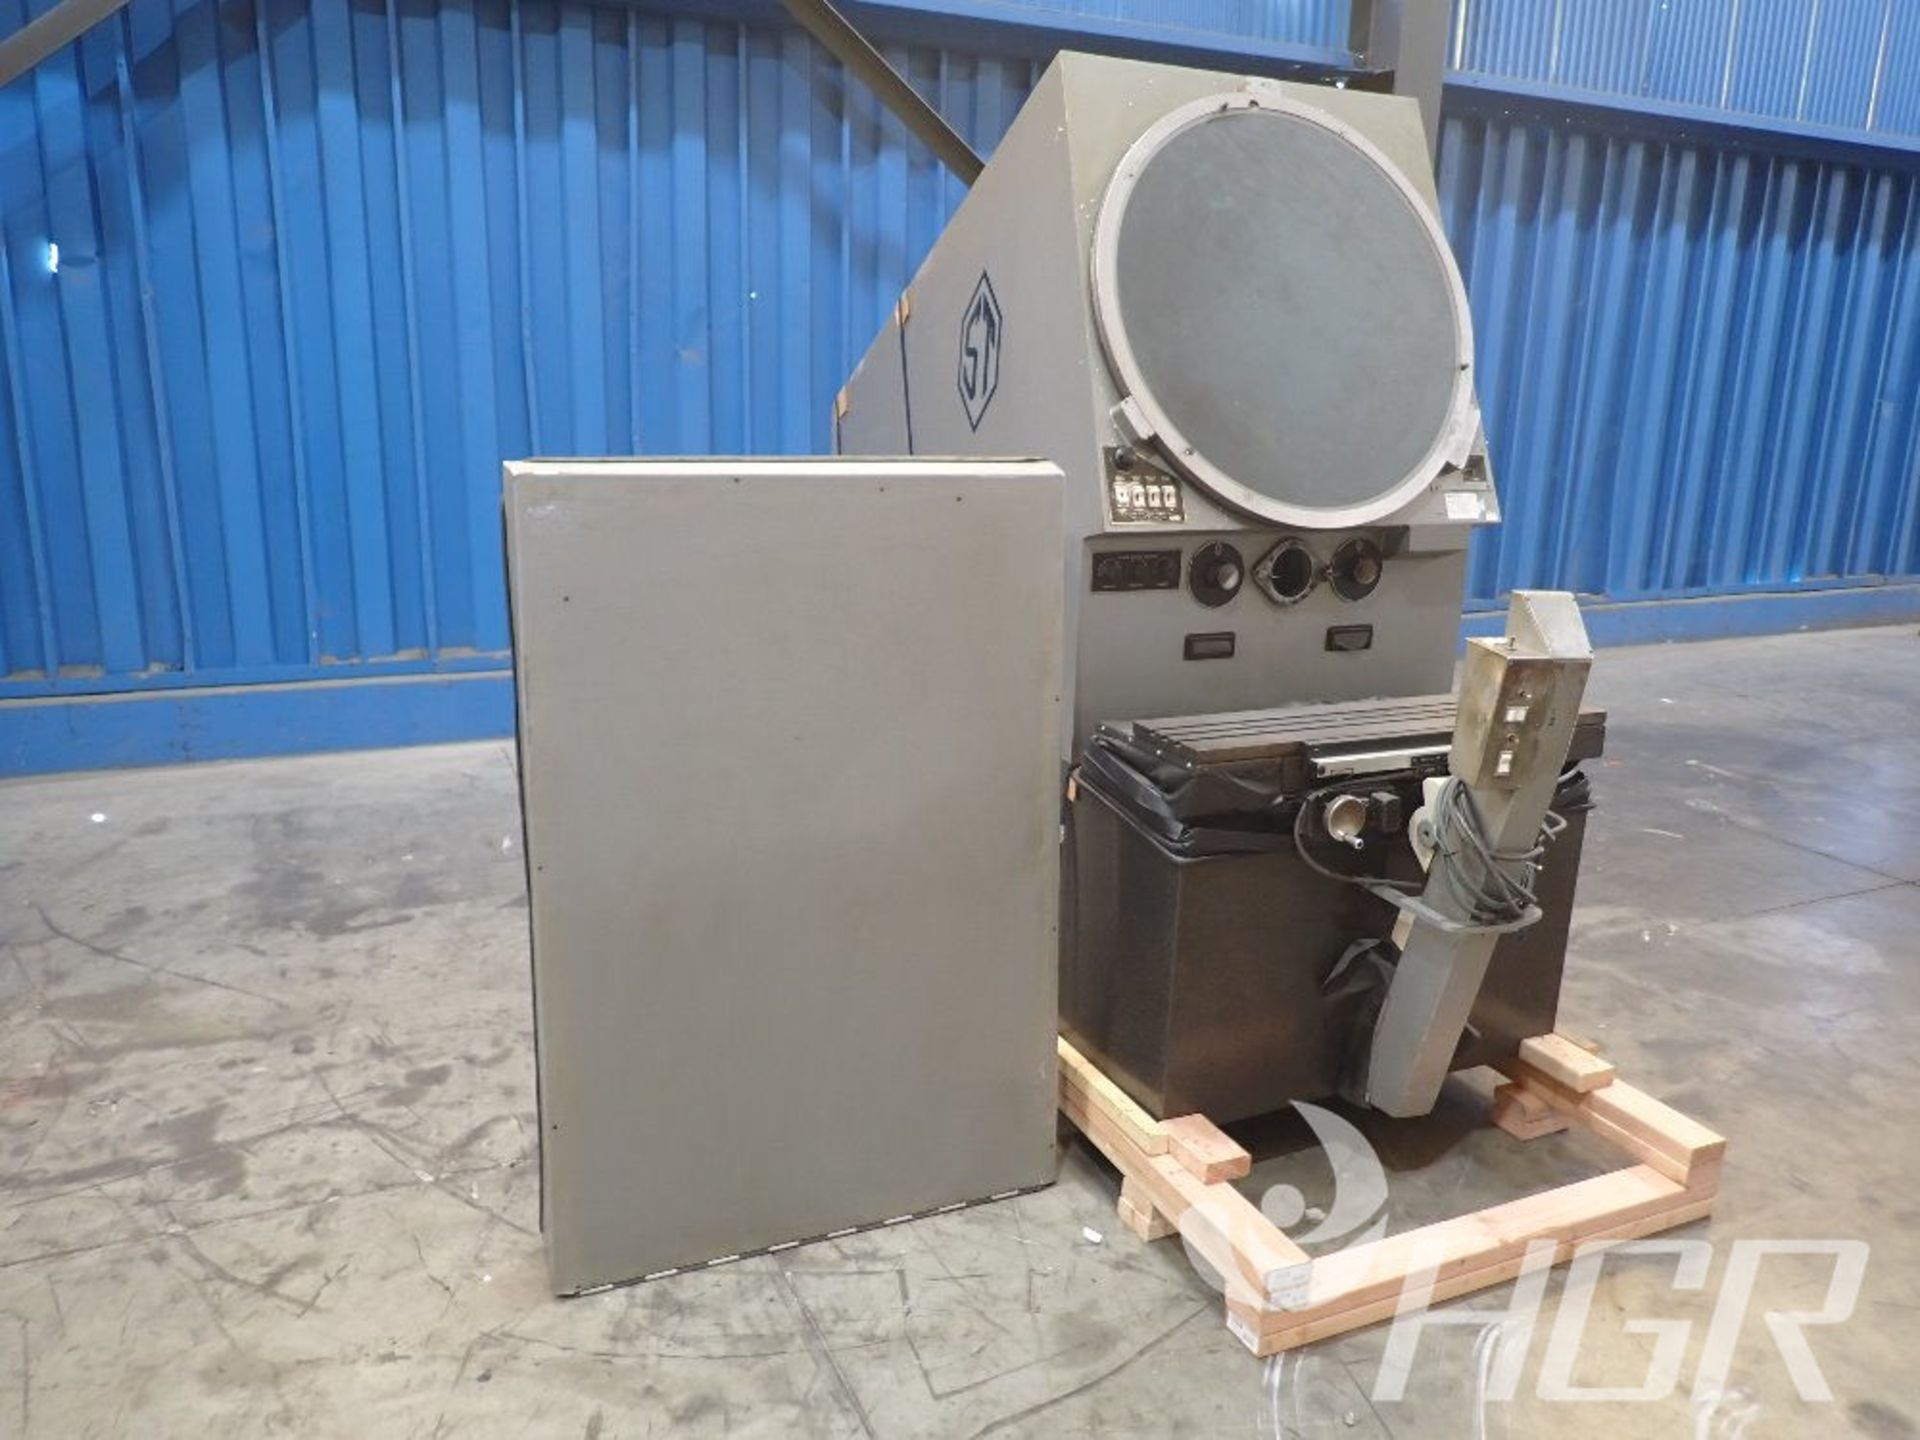 SCHERR TUMICO COMPARATOR, Model 22-2500, Date: n/a; s/n n/a, Approx. Capacity: 30", Power: 1/60/115,